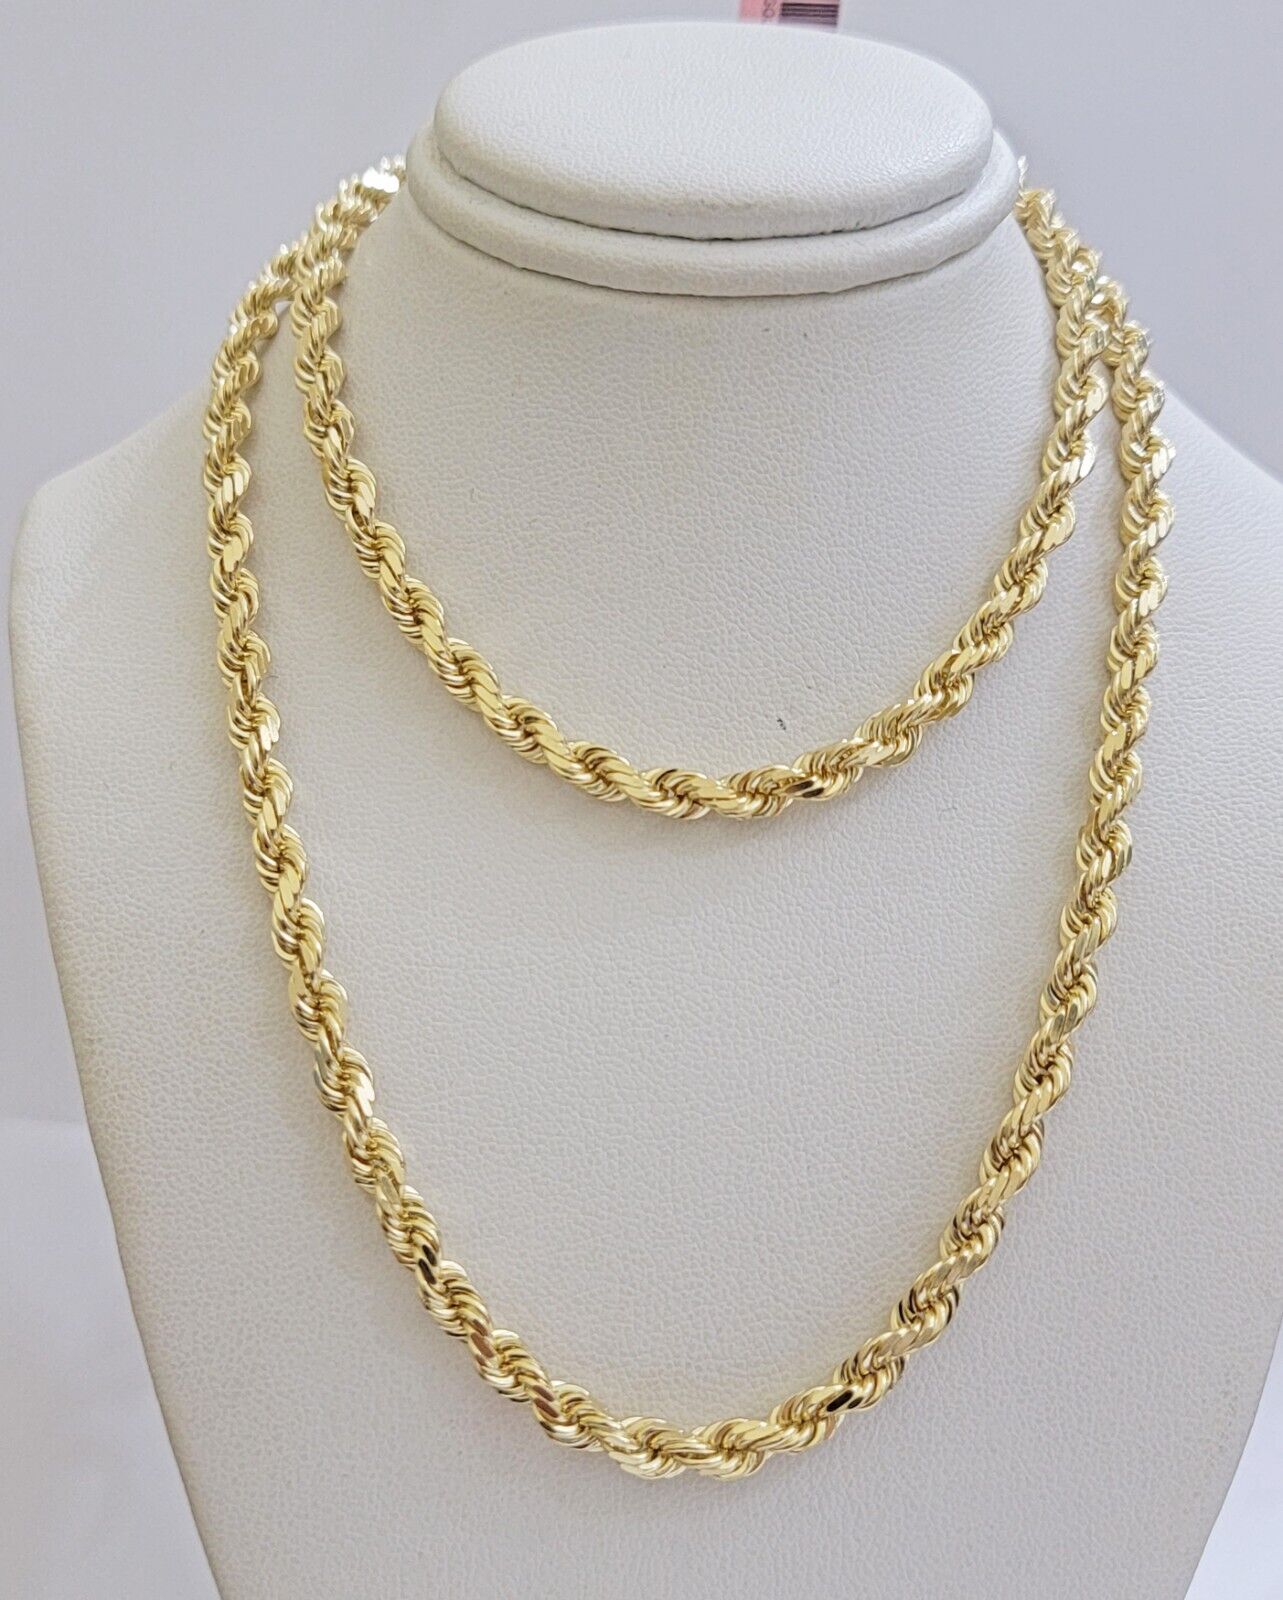 Real 14K Yellow Gold Rope Chain Necklace 24 inch 4.5mm Diamond Cuts Solid 14 KT